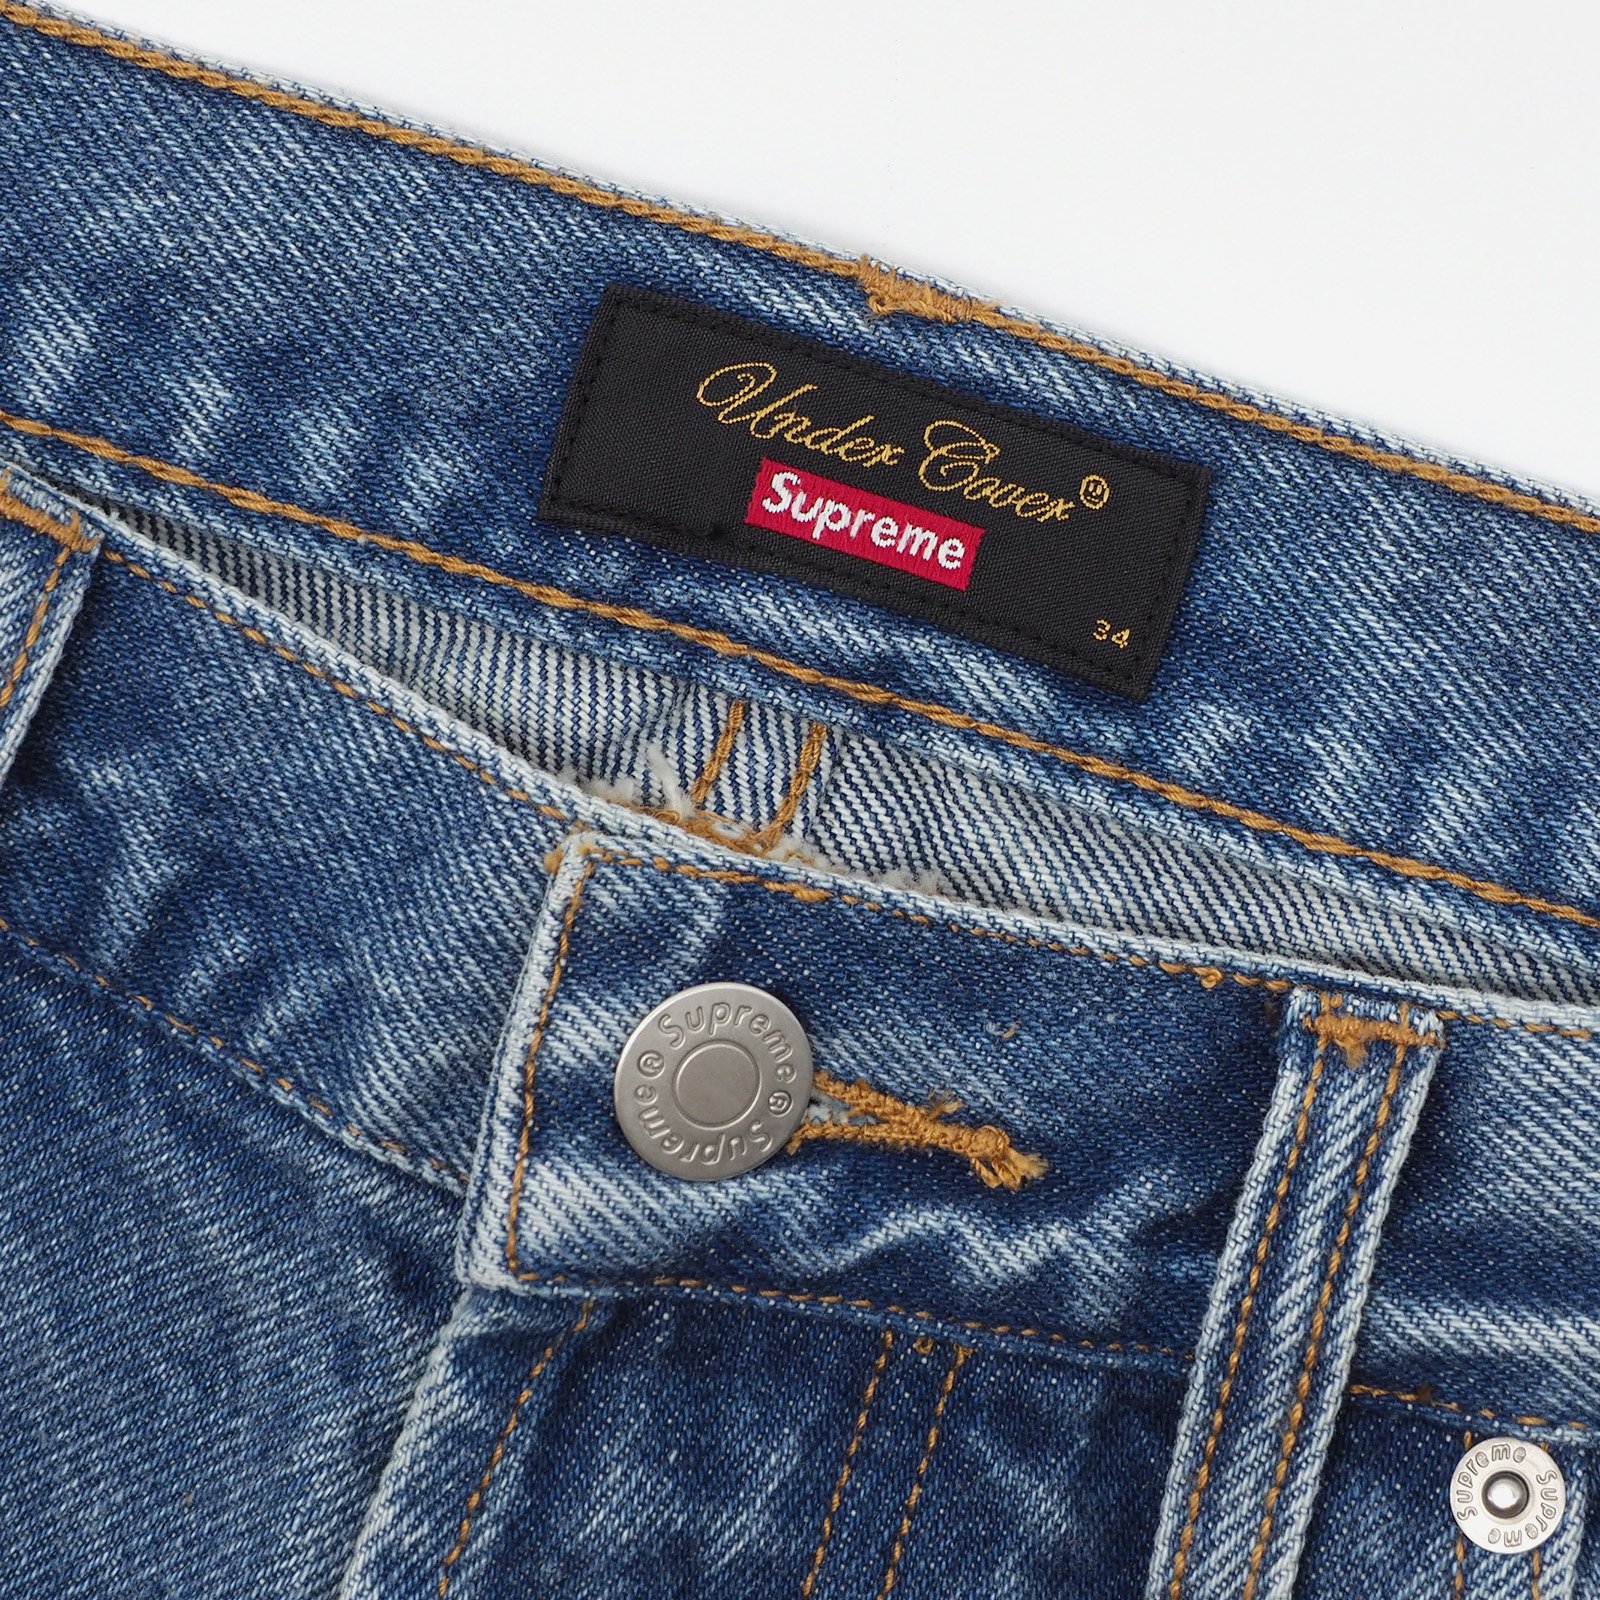 Supreme/UNDERCOVER Layered Jean - ParkSIDER